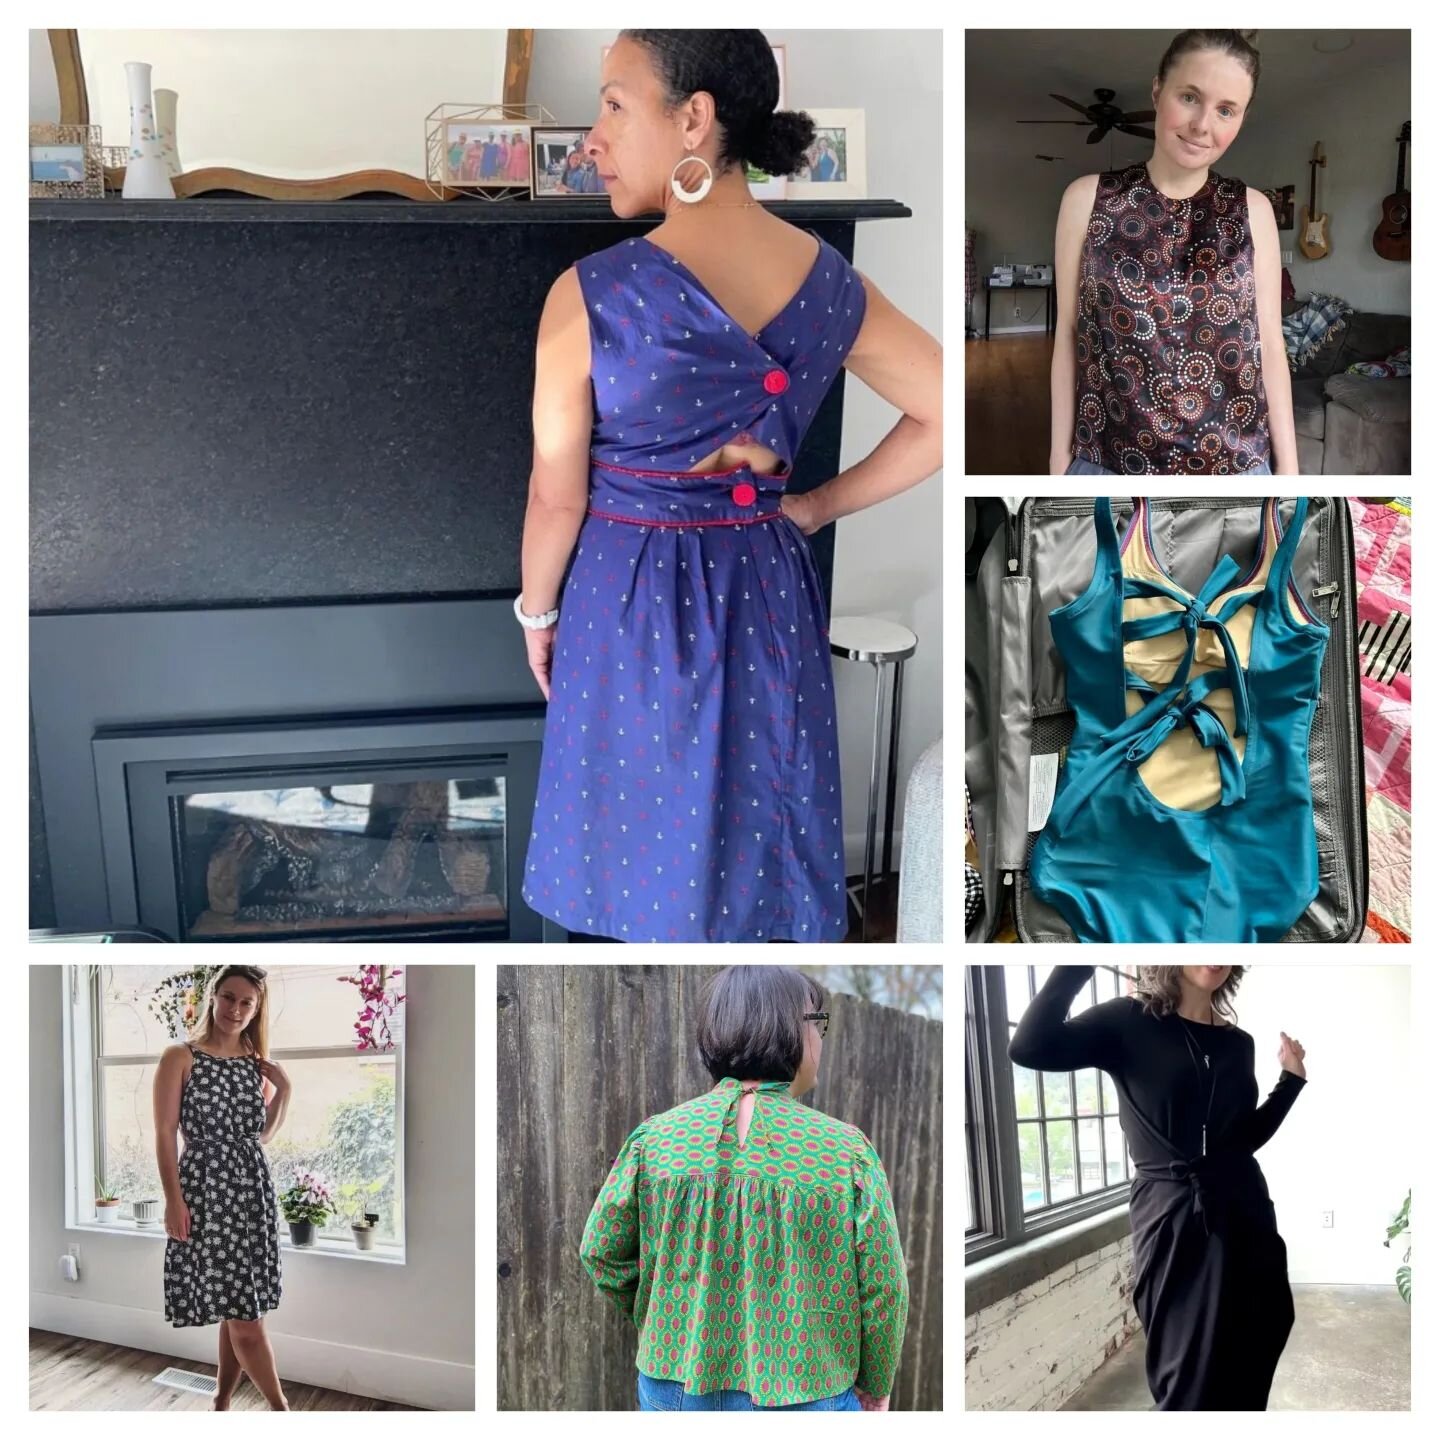 We love seeing your creative takes on the #SewingMullet! And we're thrilled to announce @_sewnique as the first Mullet Monday winner for #SewingMulletMay. Monique, you've won your choice of a @chalkandnotch pattern and your #BathurstTop looks FABULOU